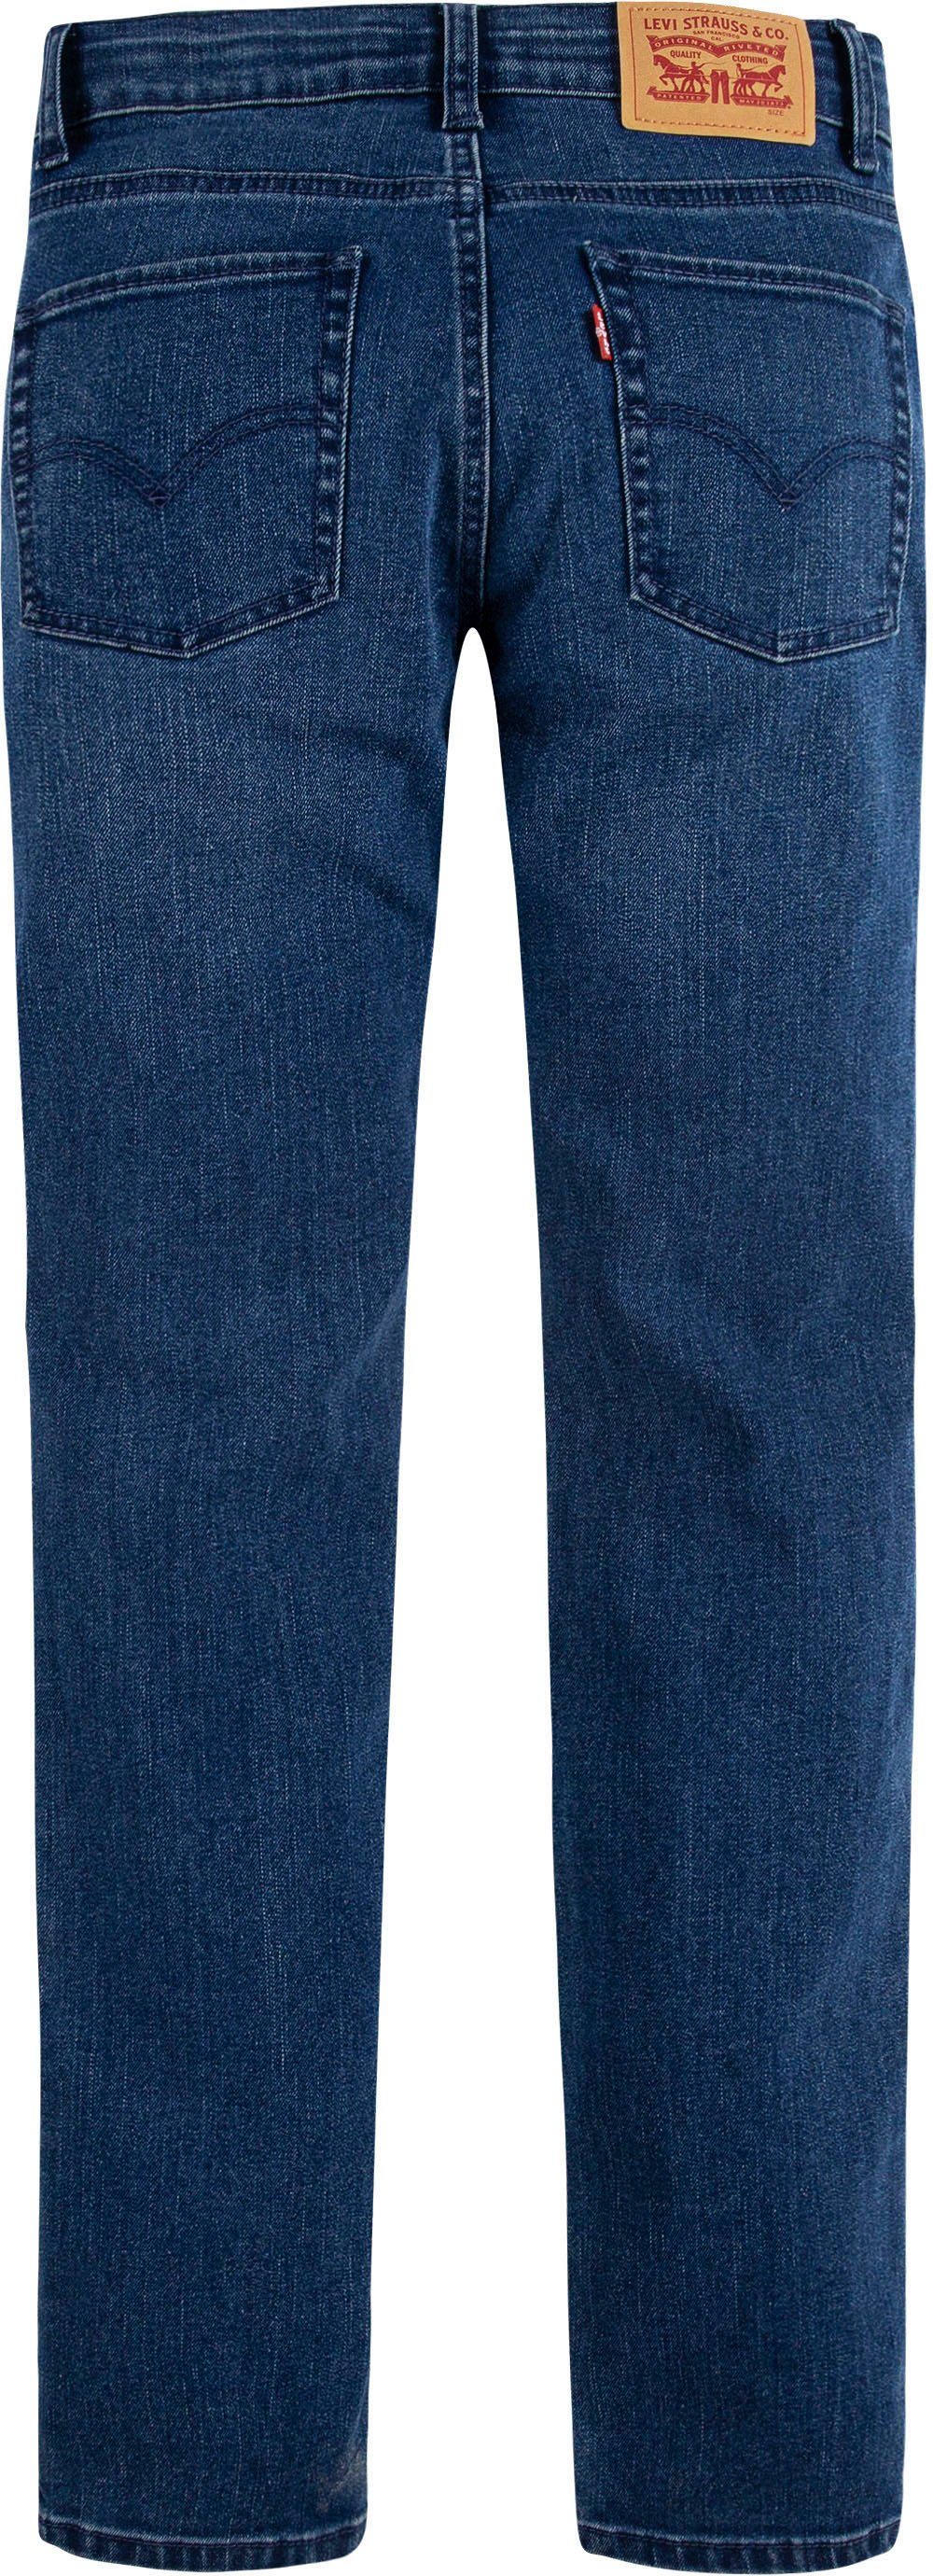 Skinny-fit-Jeans Kids heavy for JEANS 510 blue used FIT SKINNY BOYS Levi's®